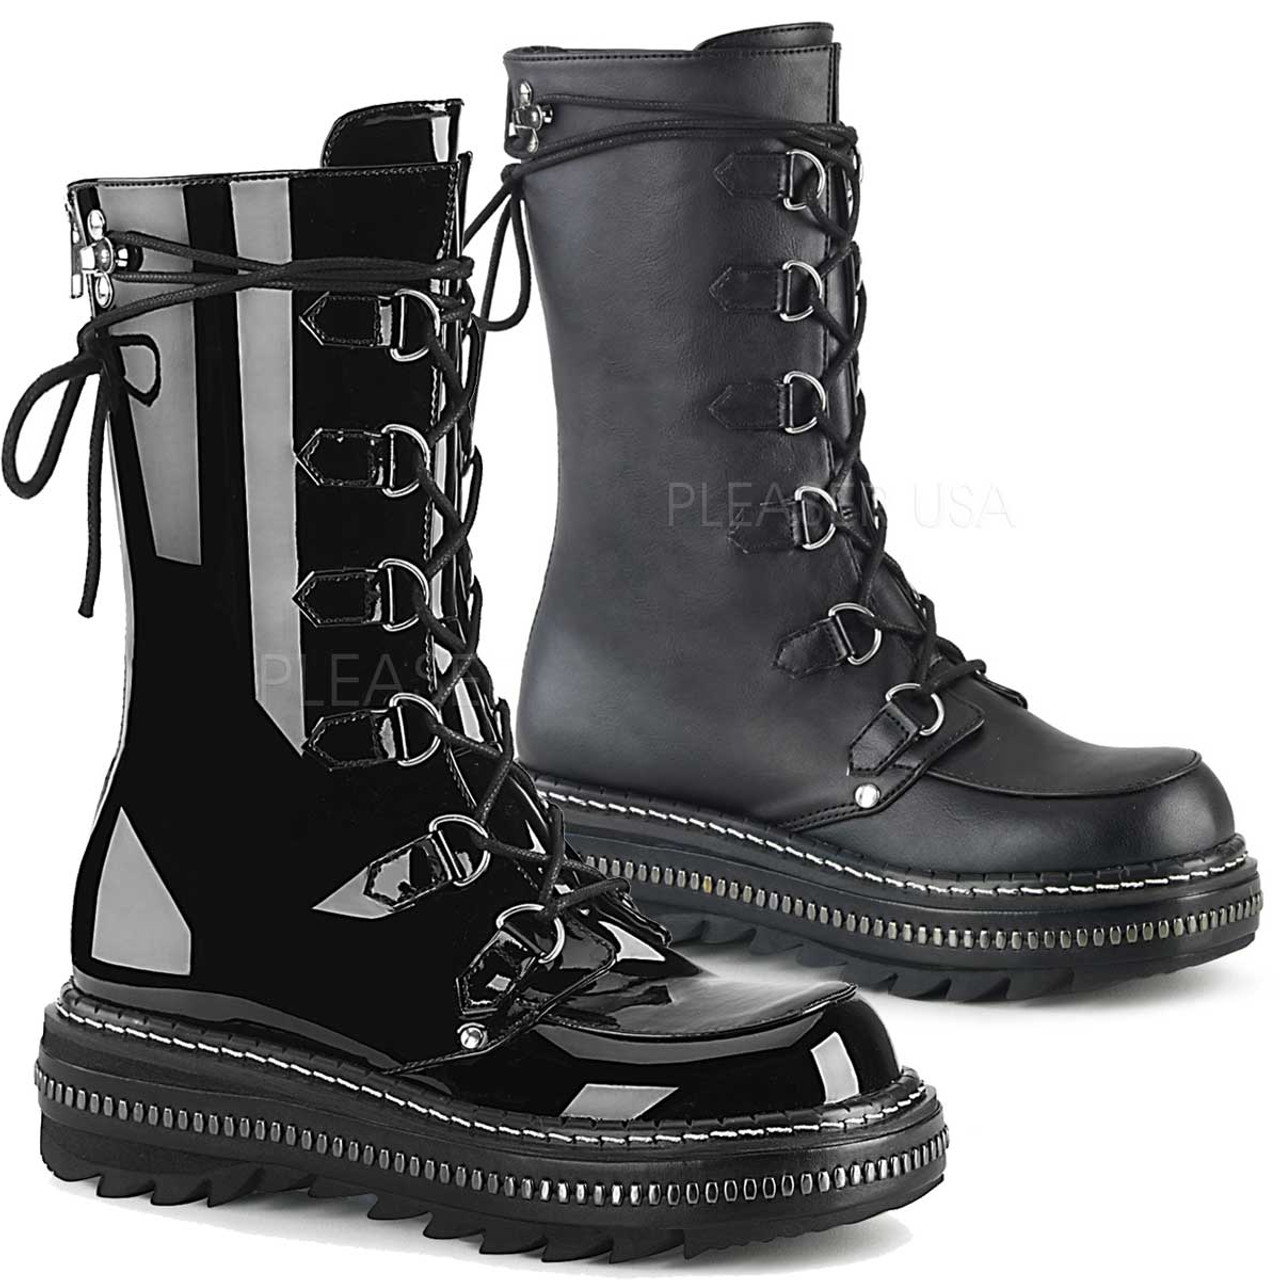 women's lace up mid calf boots